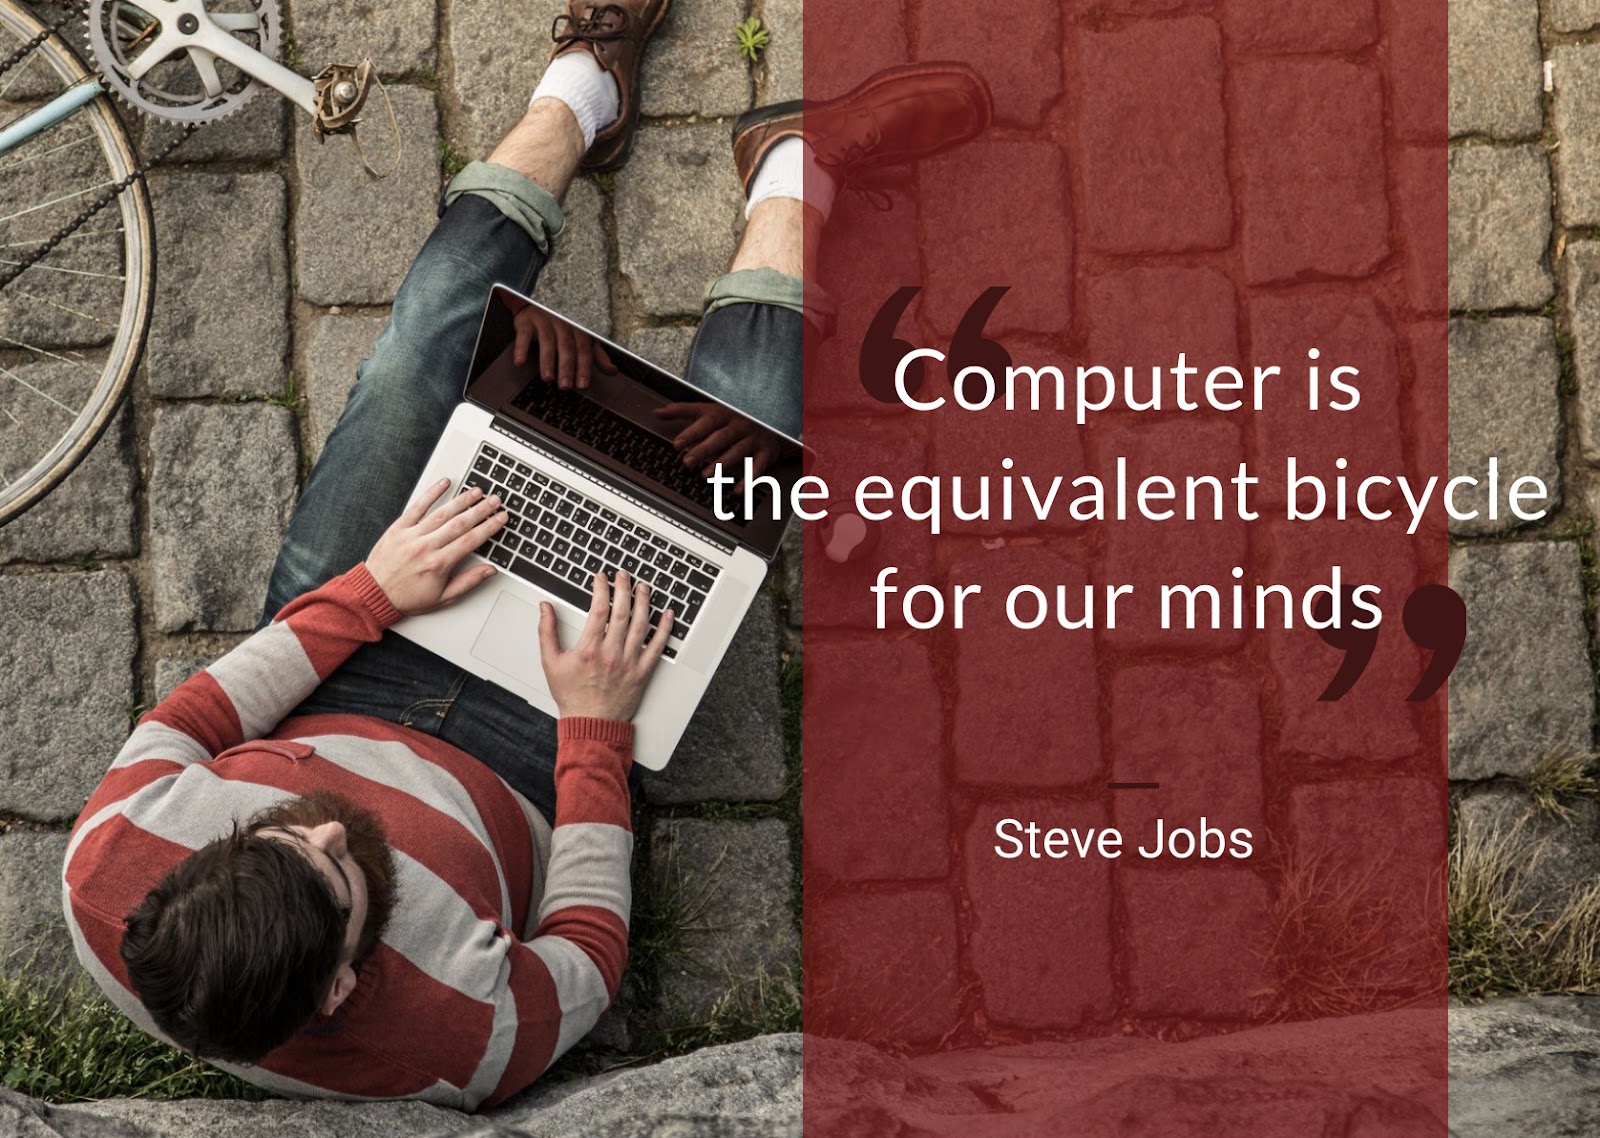 quote of Steve Jobs and a man with a bicycle 